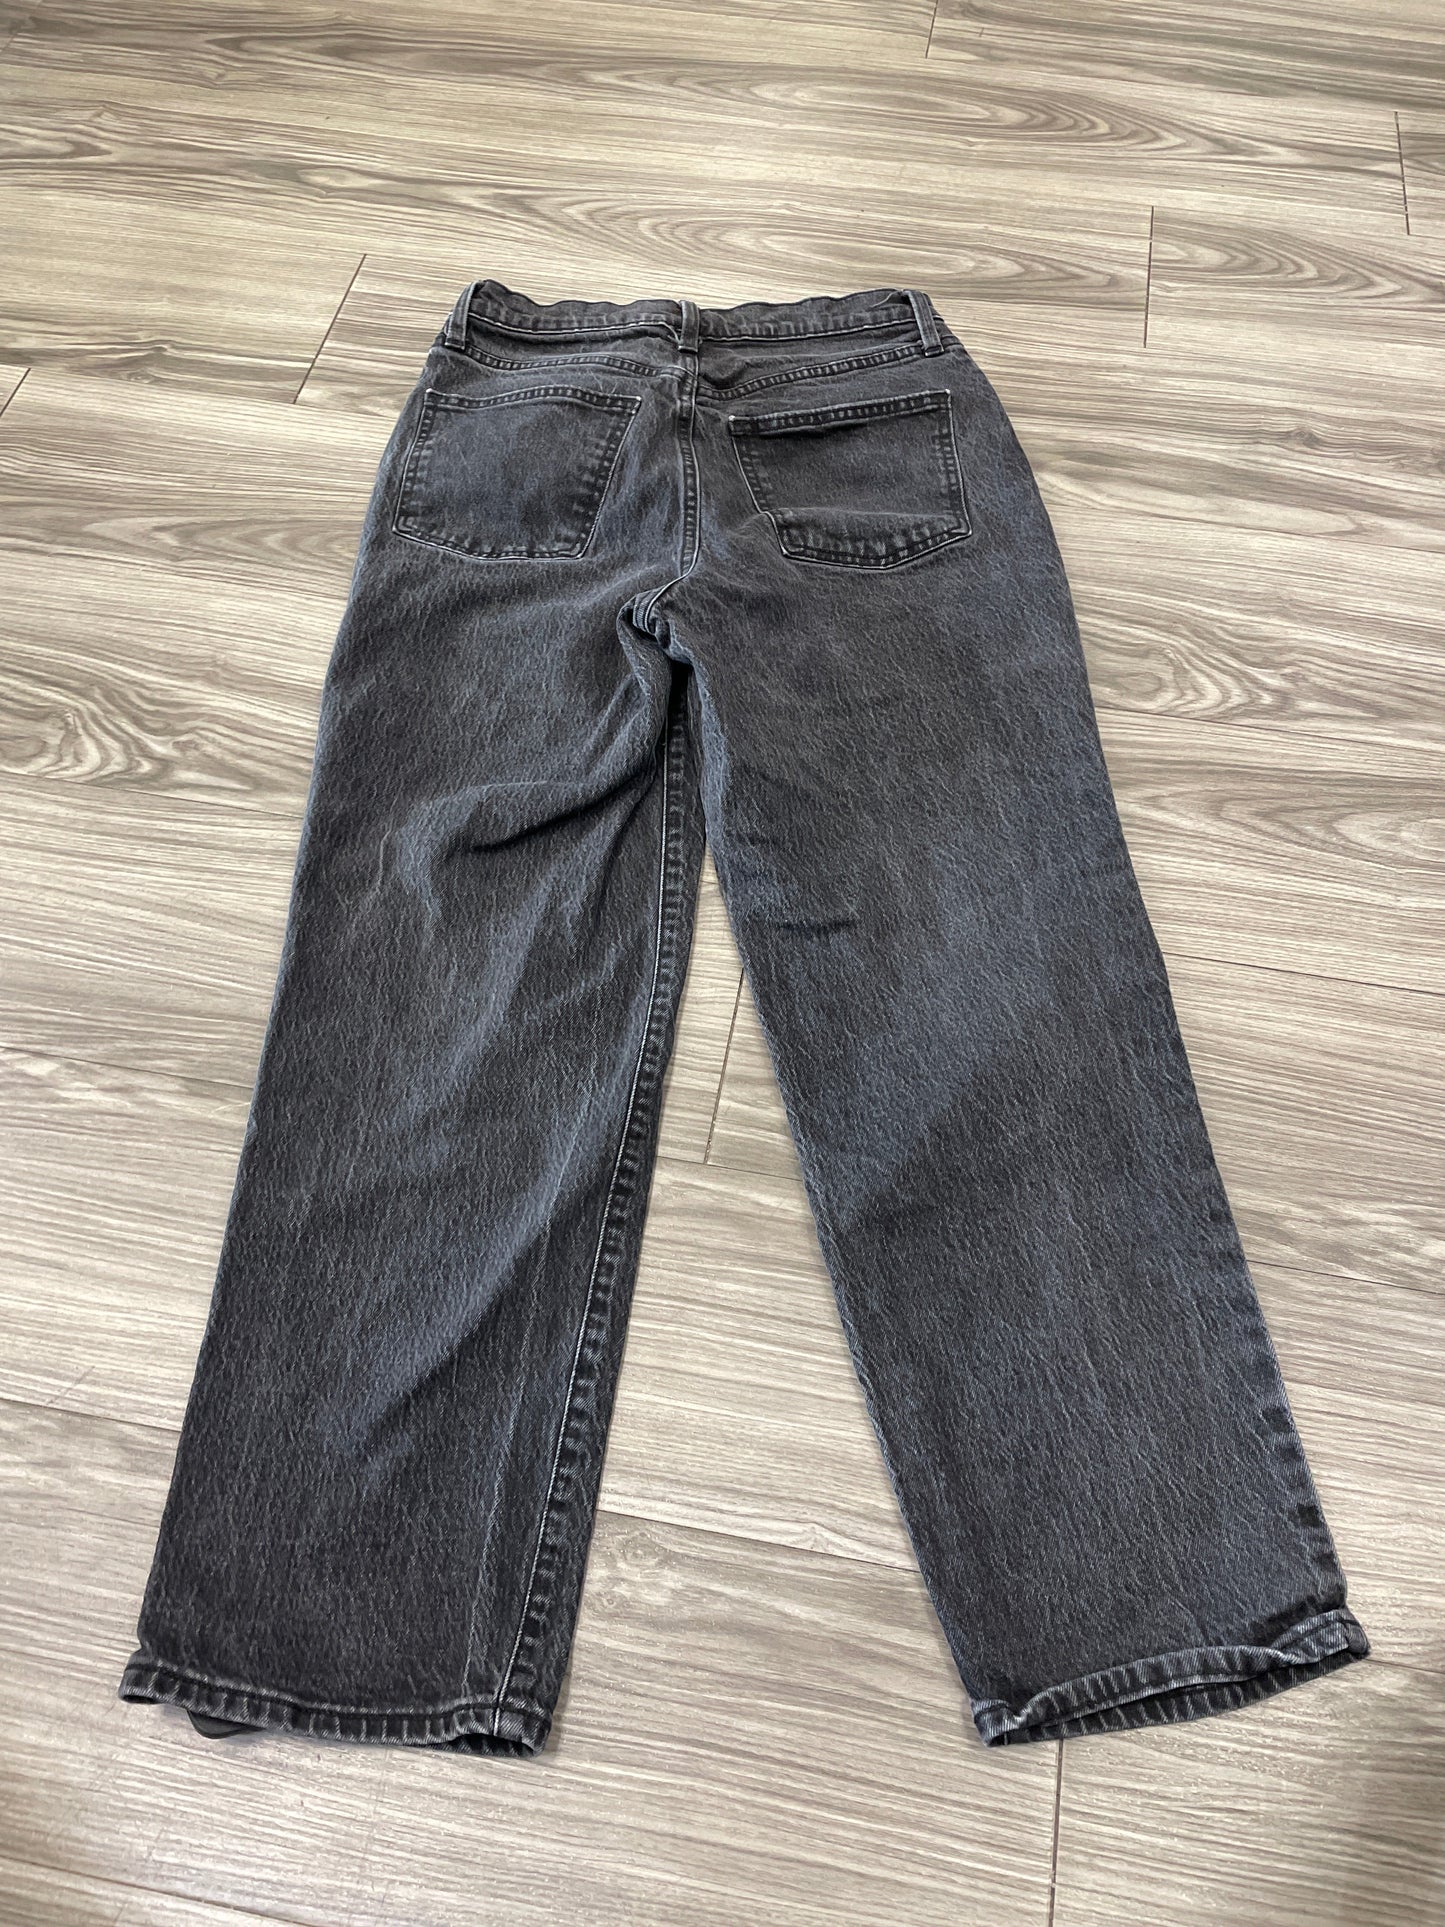 Jeans Straight By Universal Thread  Size: 8